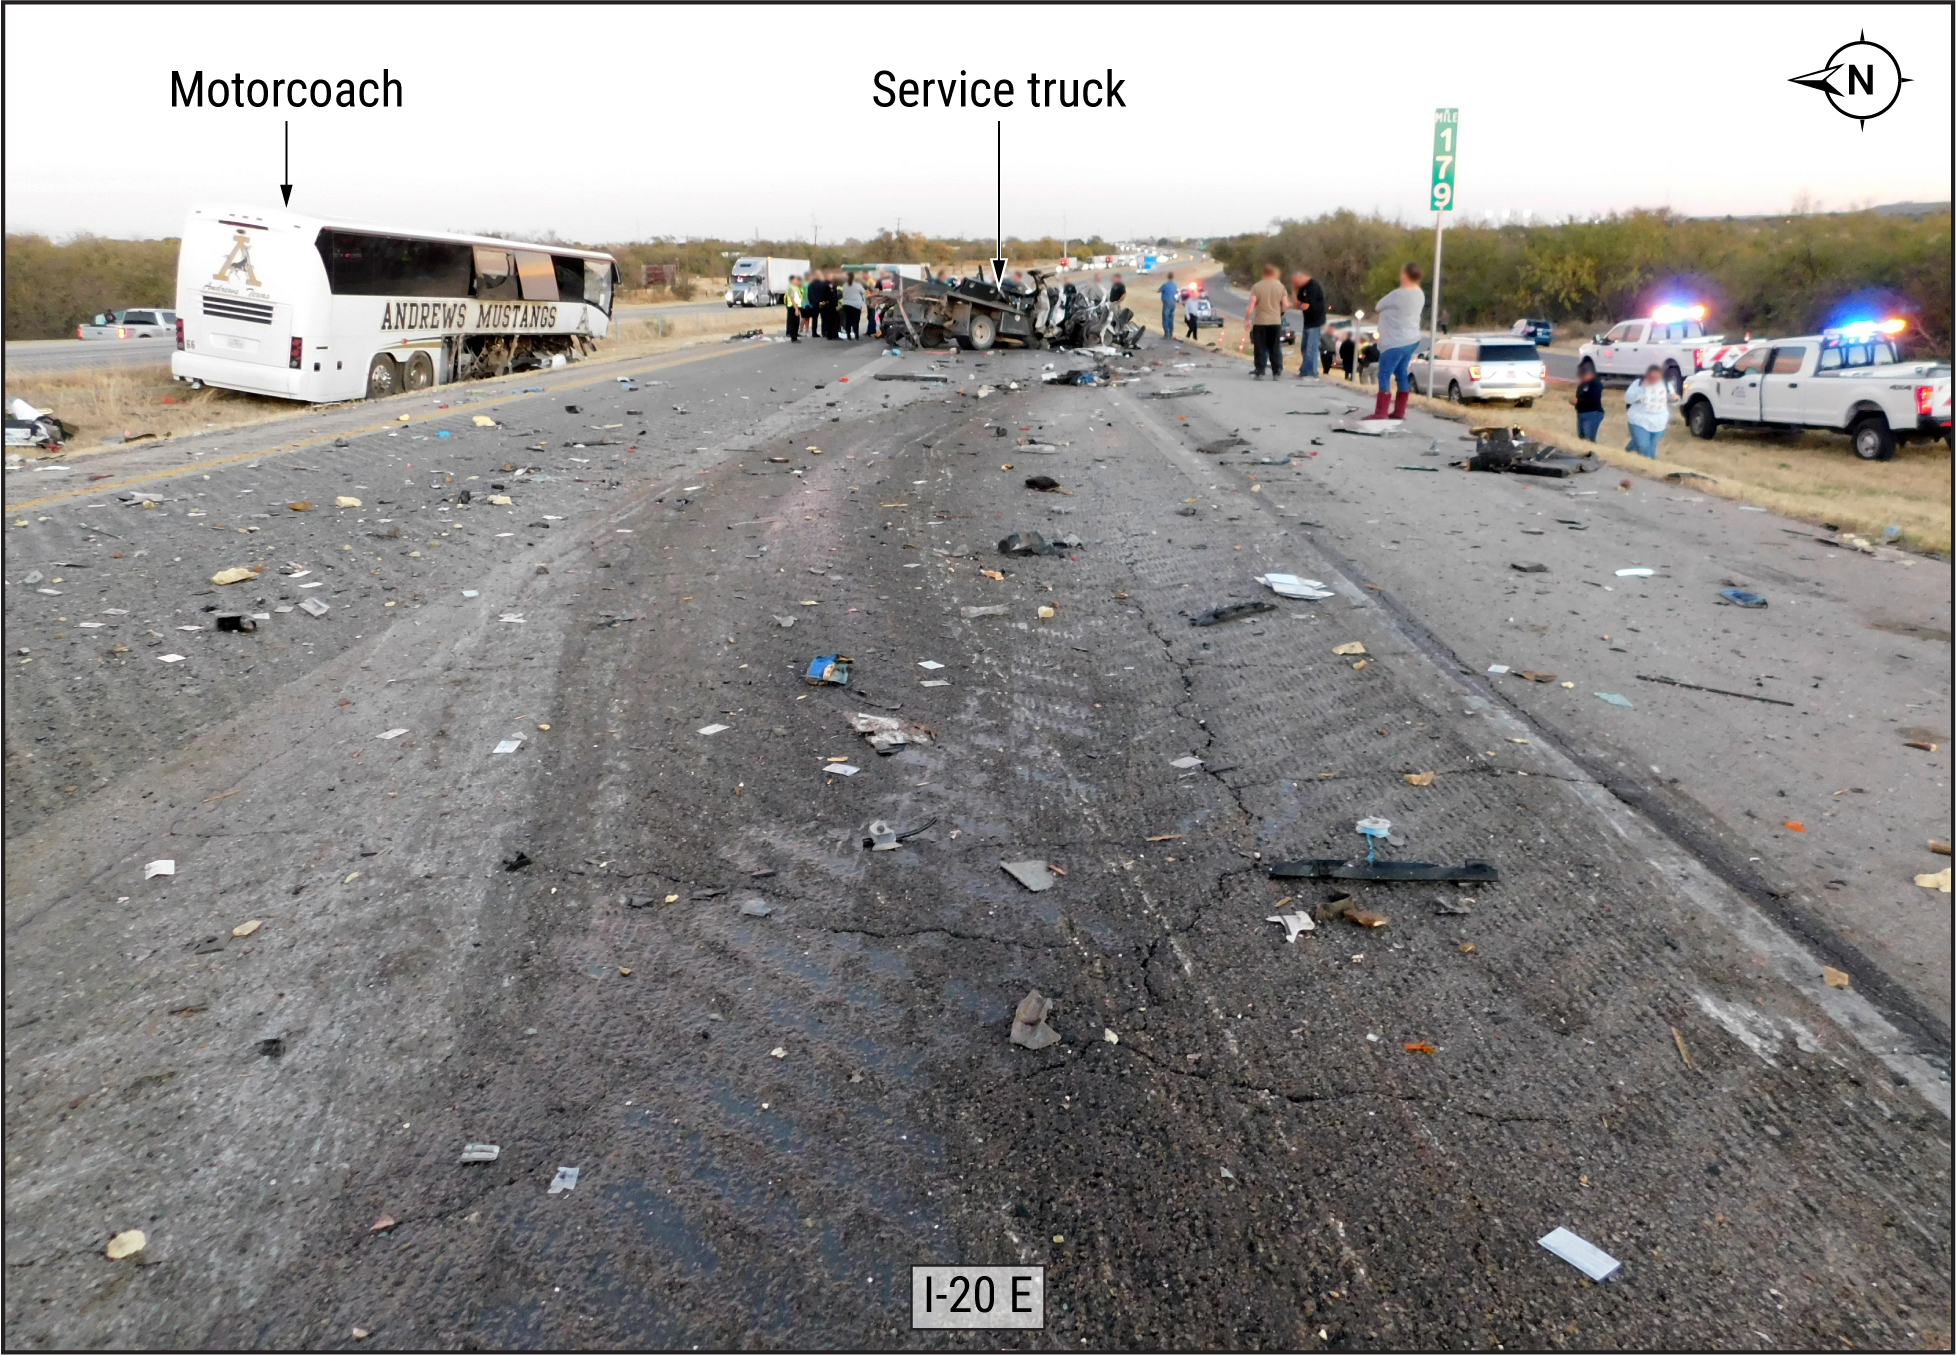 Impact area, with motorcoach in median and service truck in right-hand eastbound traffic lane, both at final rest. (Source: Texa